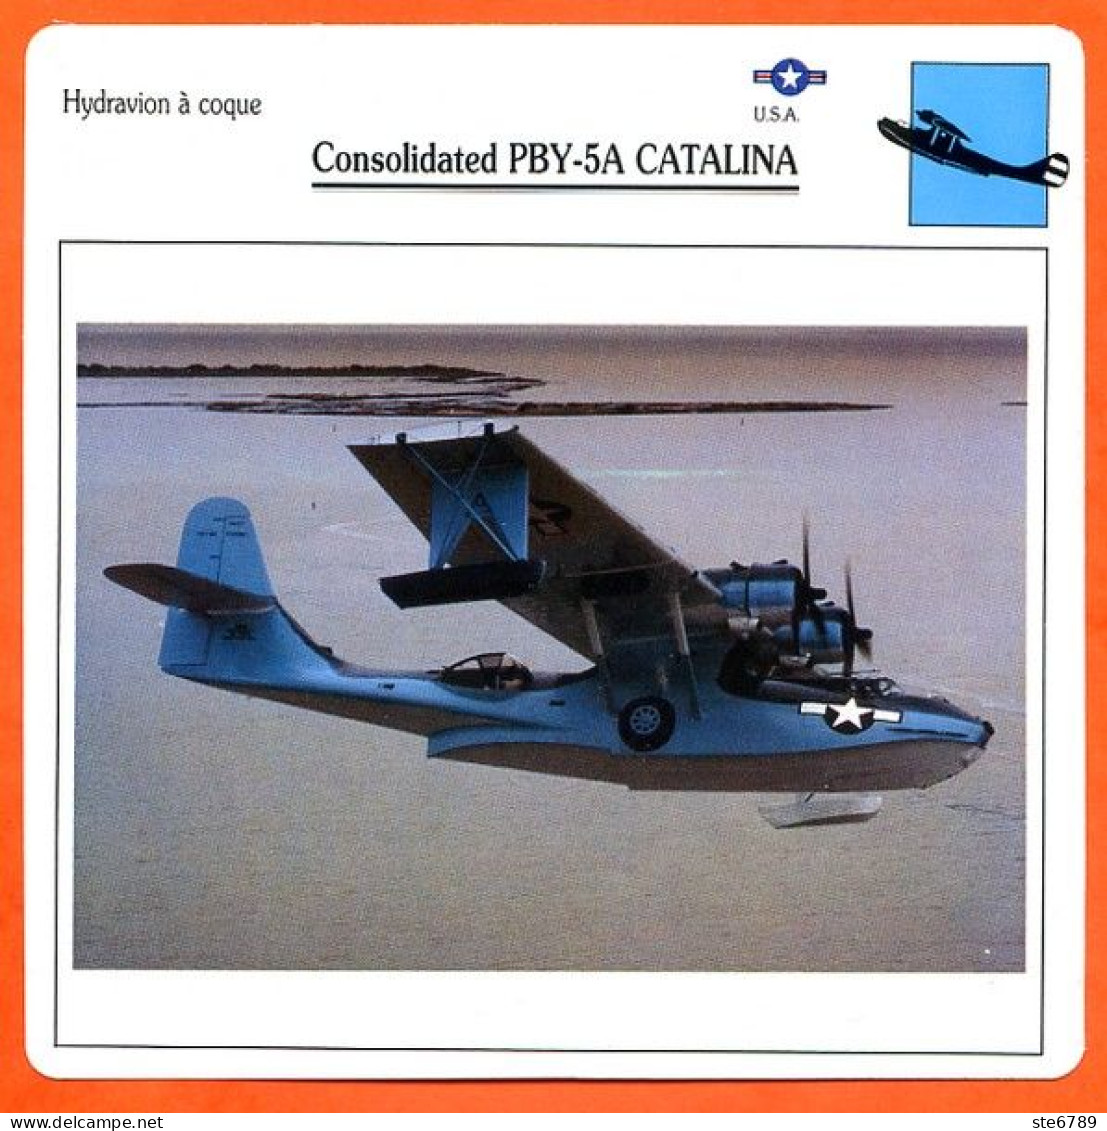 Fiche Aviation Consolidated PBY 5A CATALINA / Hydravion A Coque USA Avions - Avions